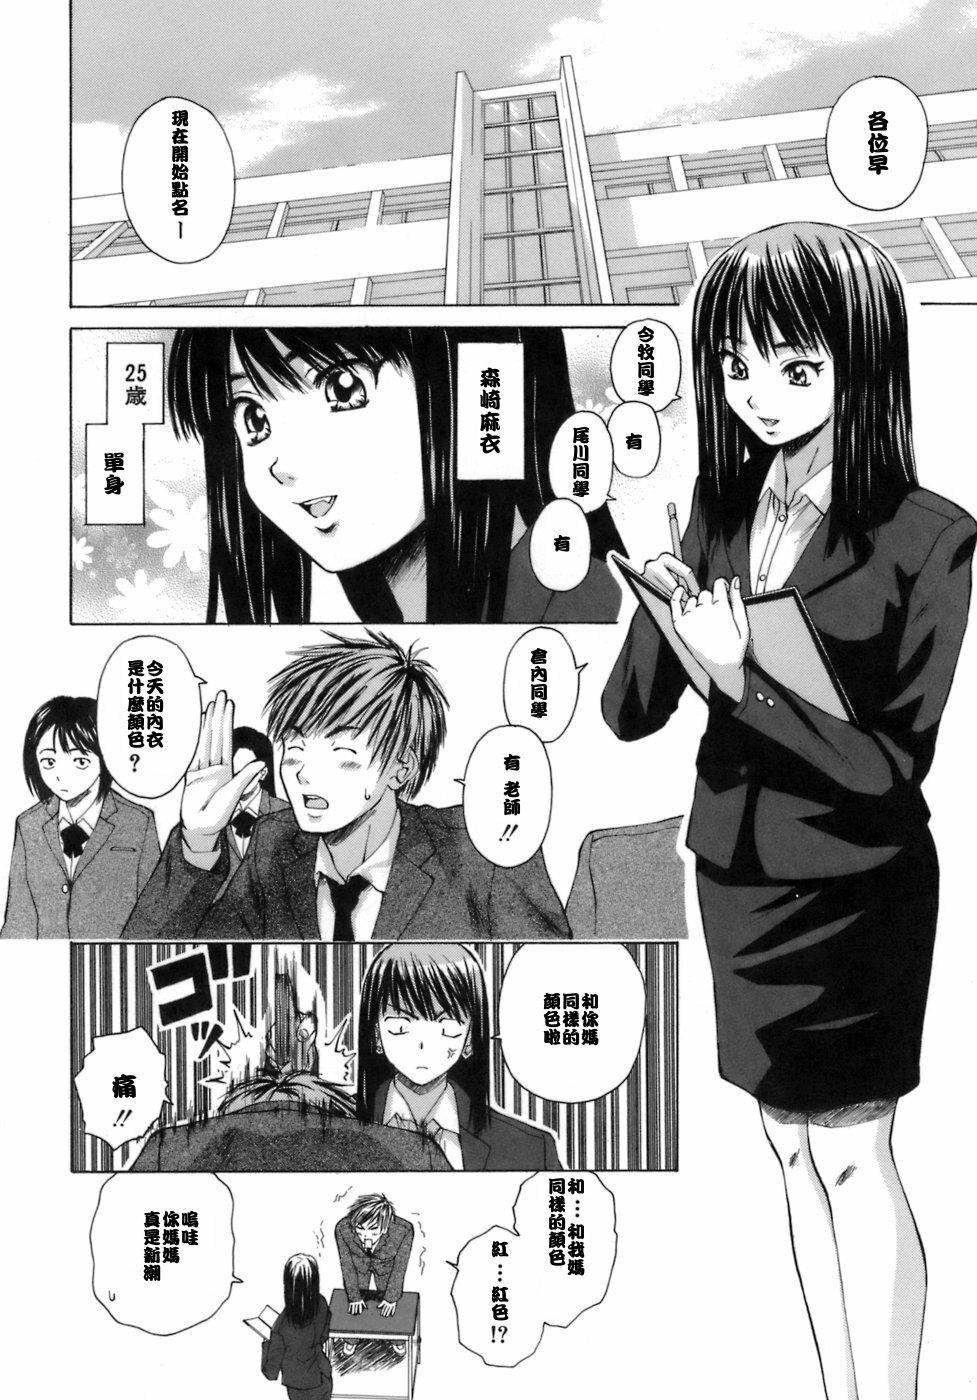 [Fuuga] Kyoushi to Seito to - Teacher and Student [Chinese] [悠月工房] page 5 full